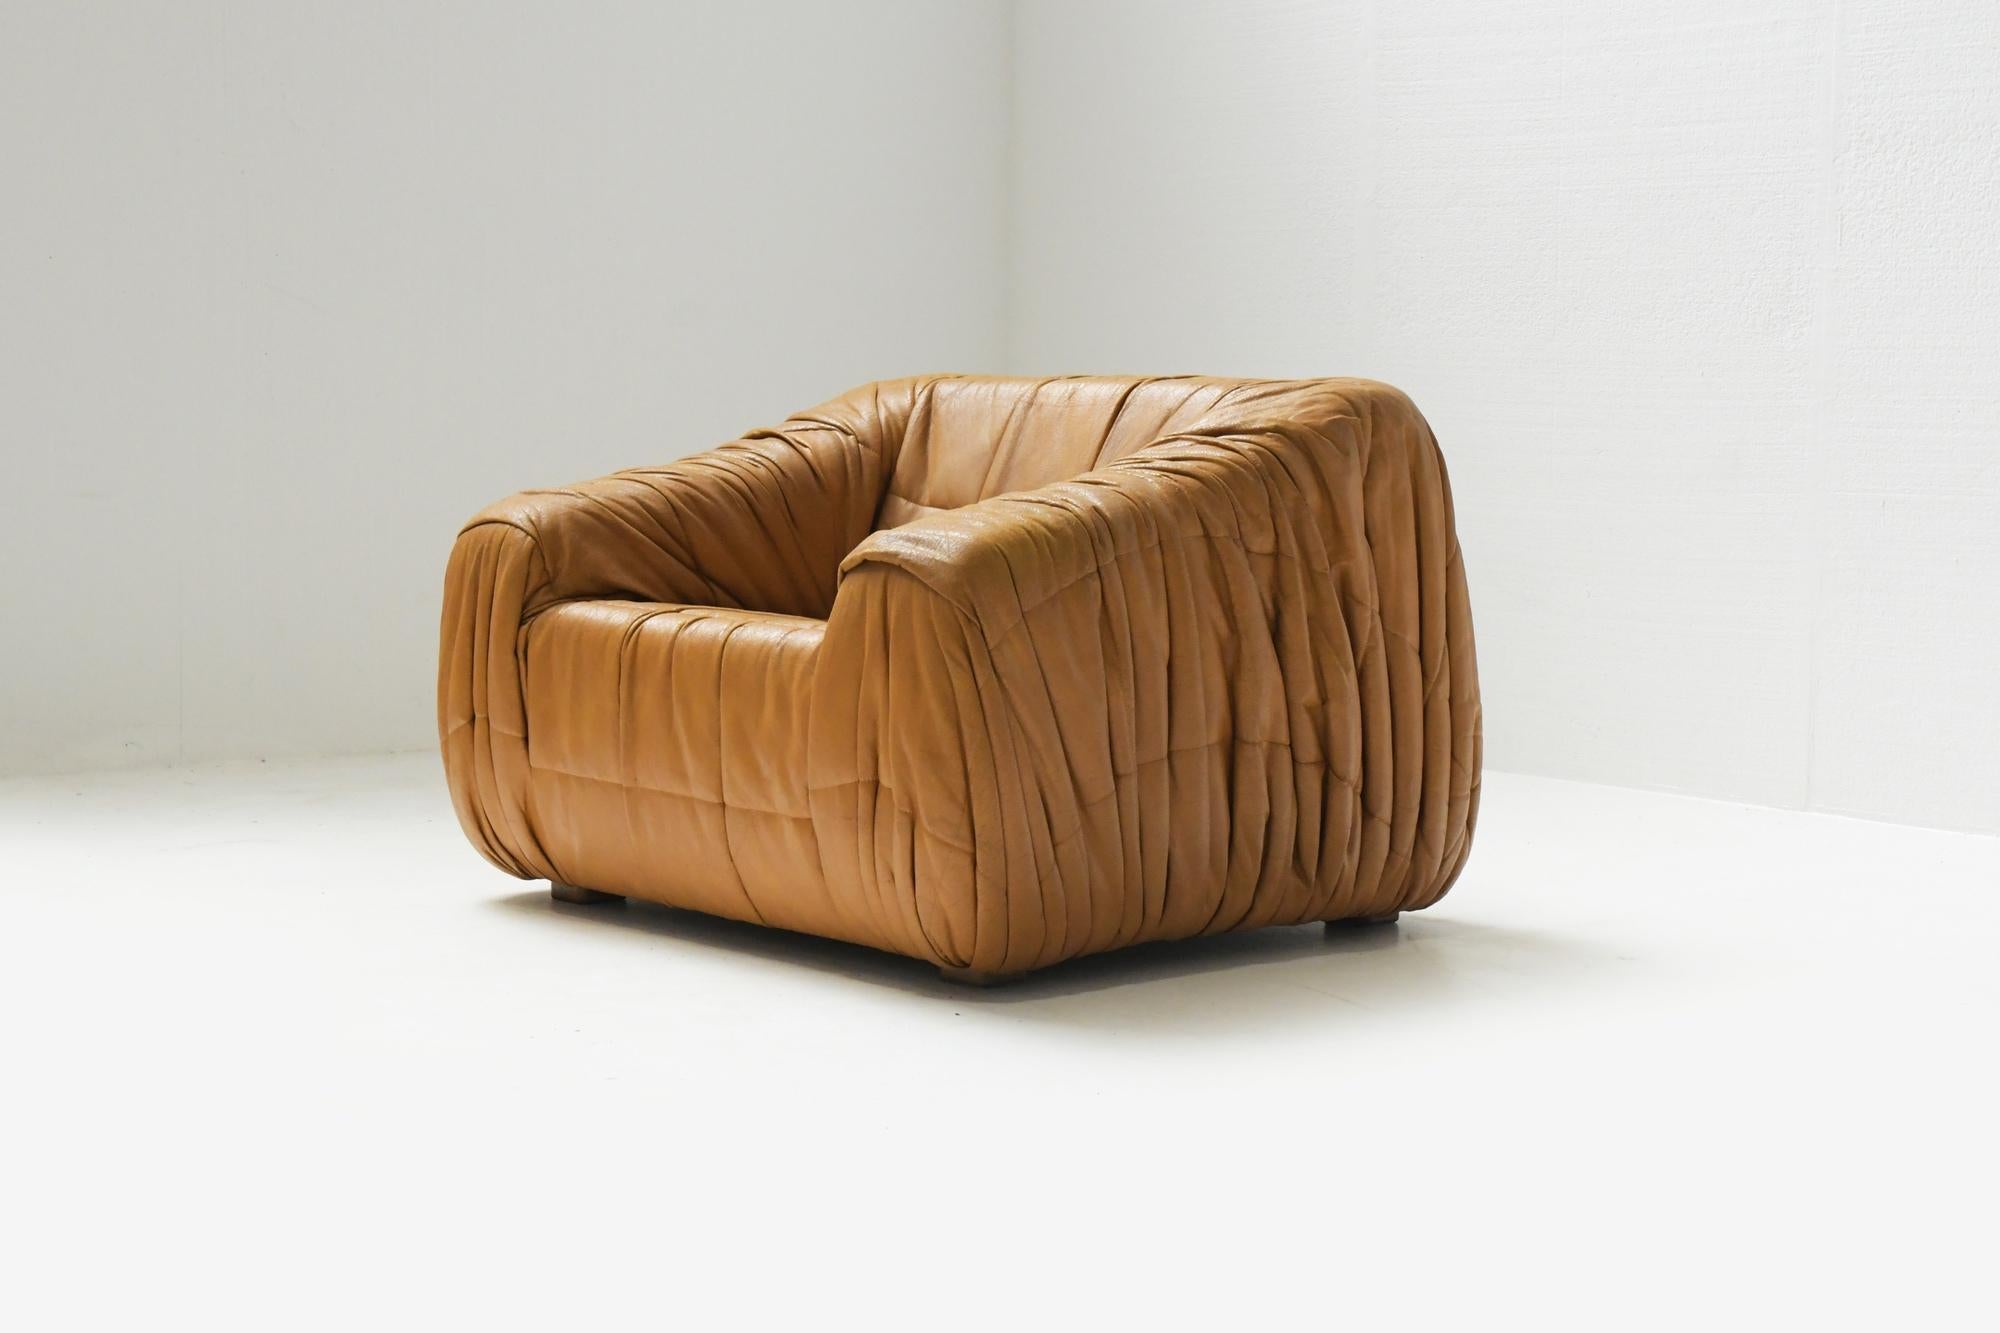 Fantastic ‘Piumino’ lounge chair designed by the Milanese architect trio De Pas, D’urbino and Lomazzi and manufactured by Dall’Oca, Italy, 1970. 
The chair has an ultra soft cognac faux leather upholstery with a stunning wrinkled stitching